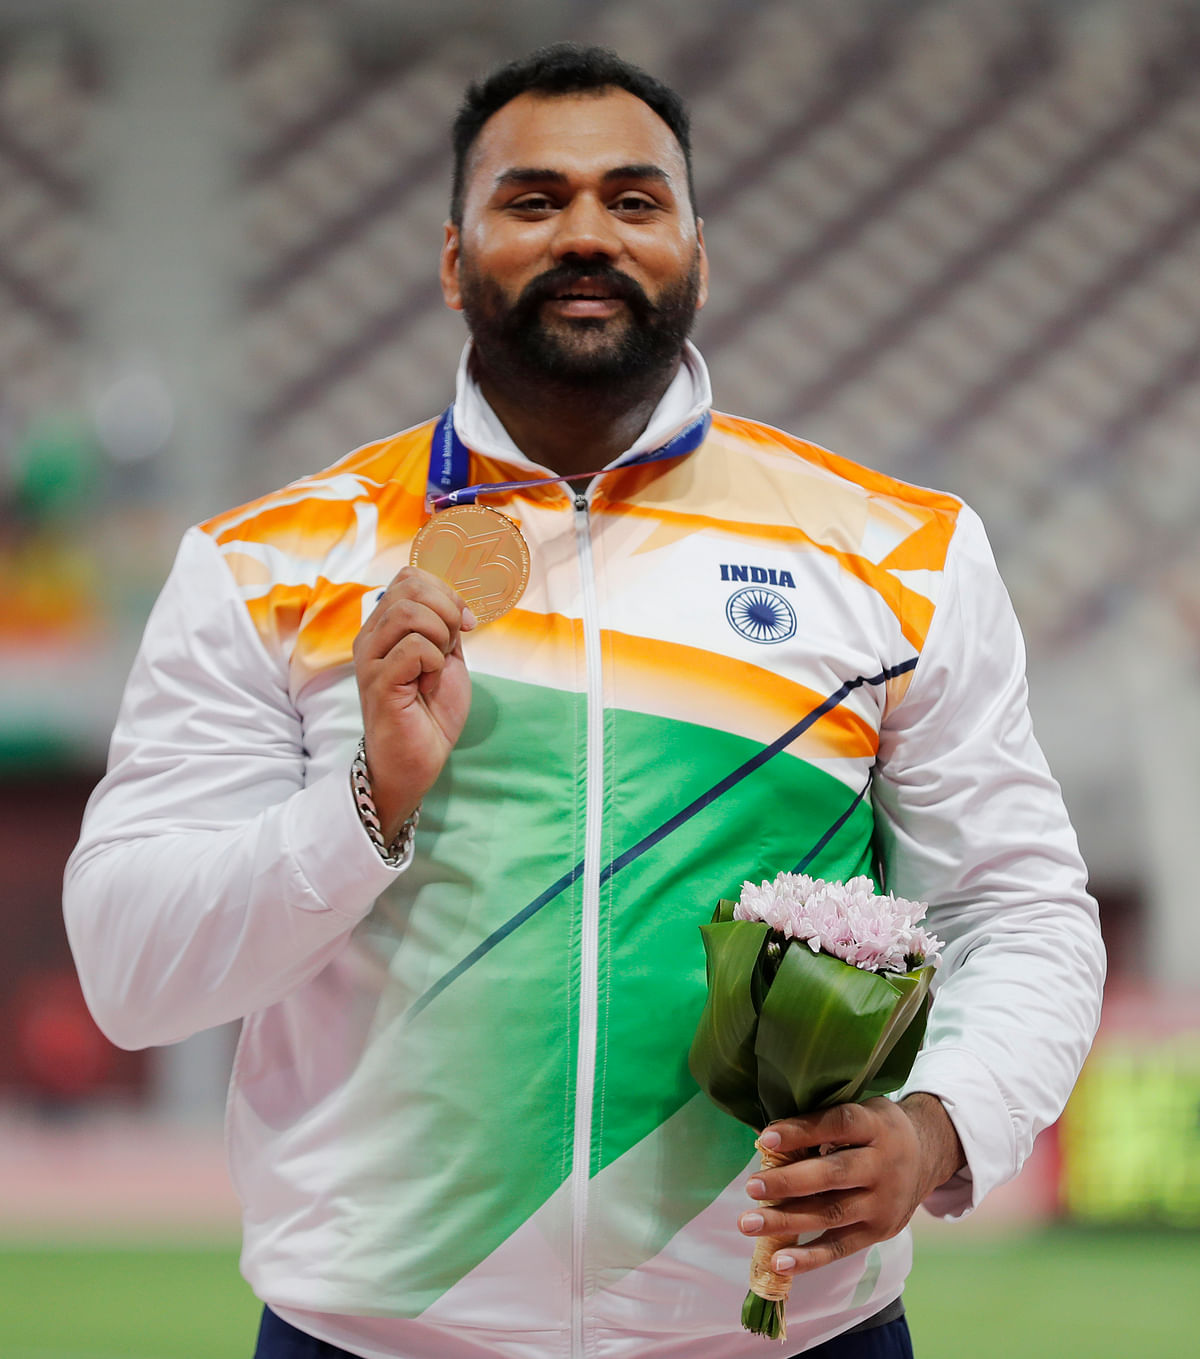 Unheralded half miler Gomathi Marimuthu and shot putter Tejinderpal Singh Toor clinched a gold each for India.